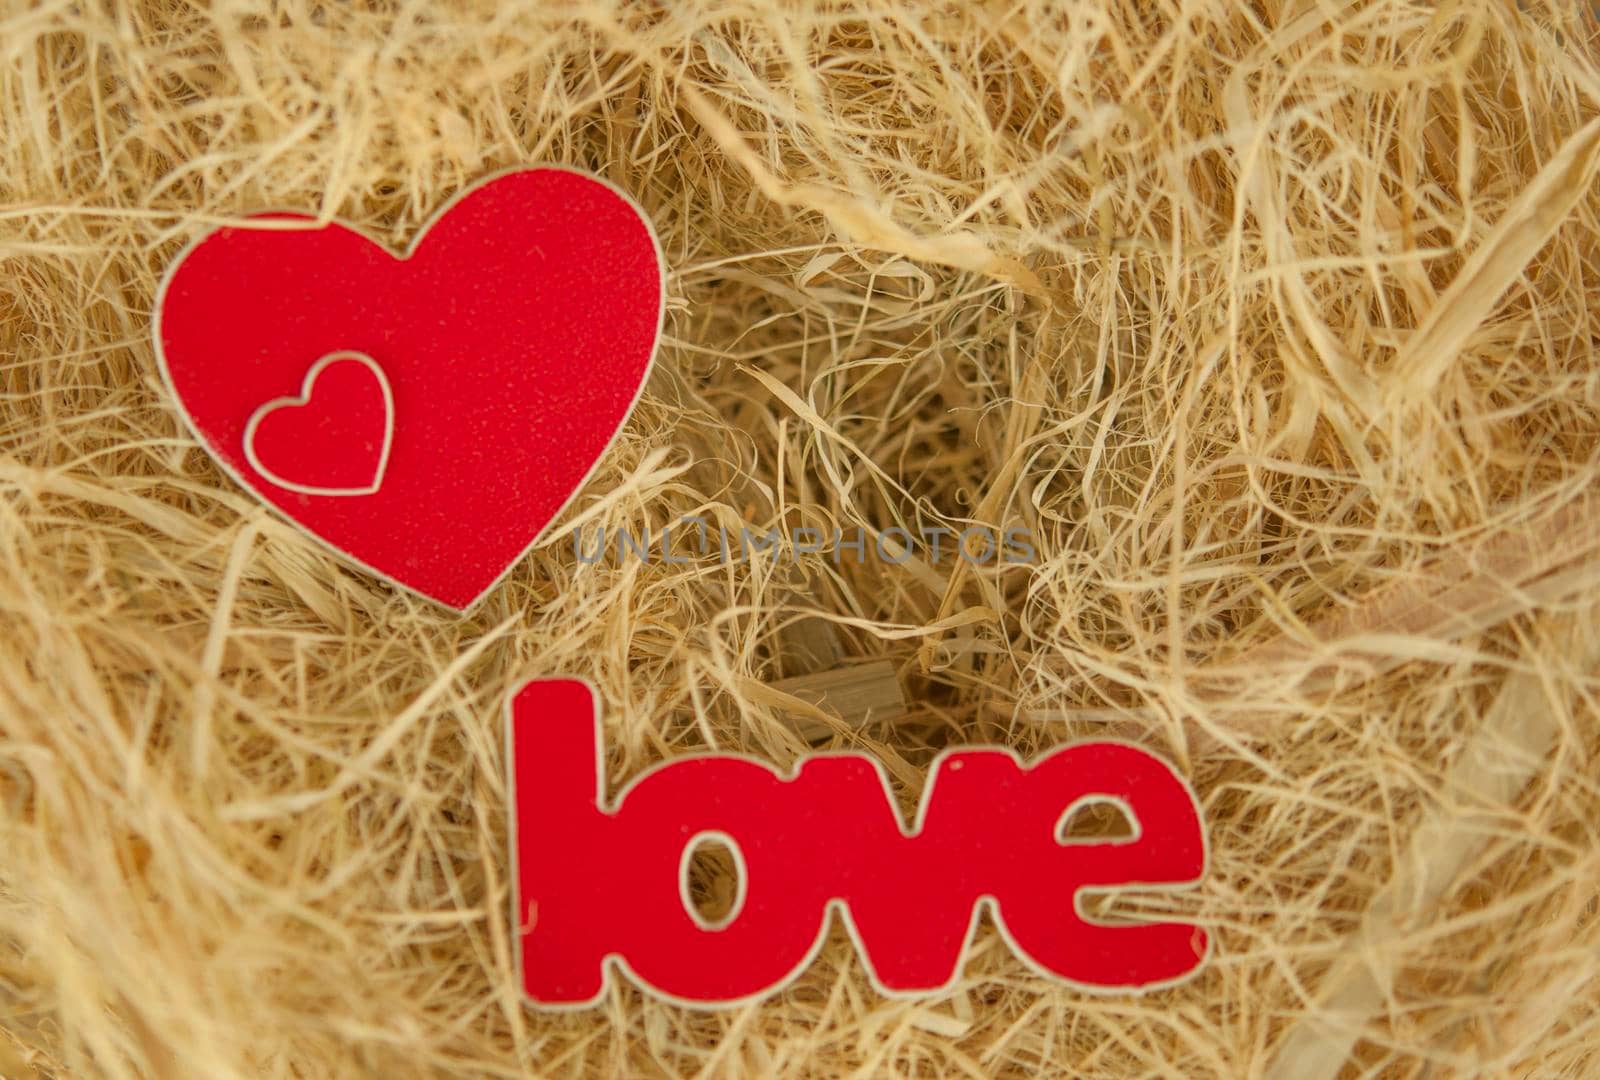 Dry yellow straw grass background texture after havest with two hearts. Top view, copy space.